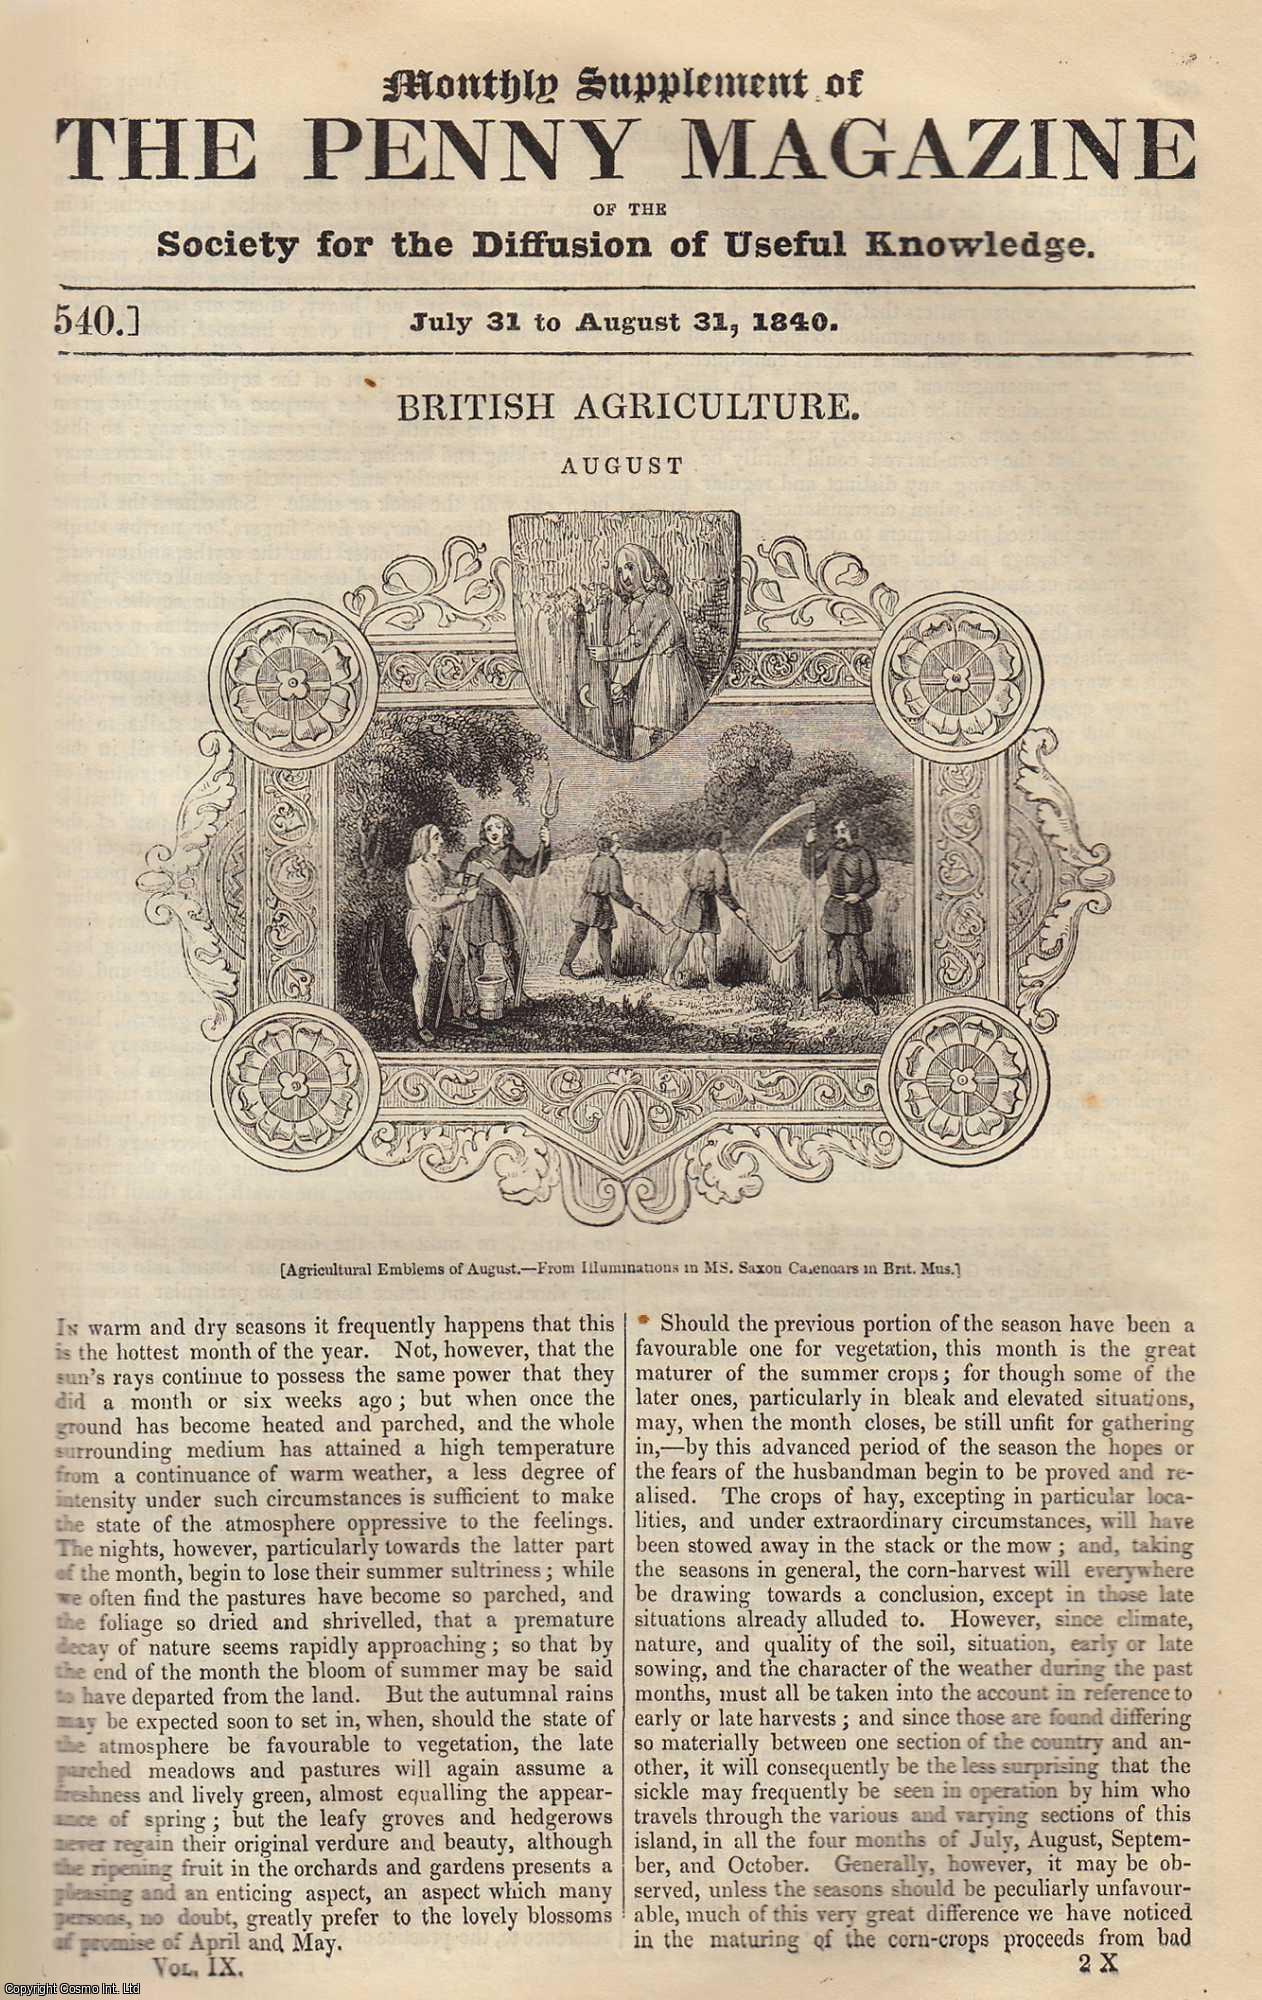 --- - British Agriculture (August). Issue No. 540, July 31st, 1840. A complete rare weekly issue of the Penny Magazine, 1840.